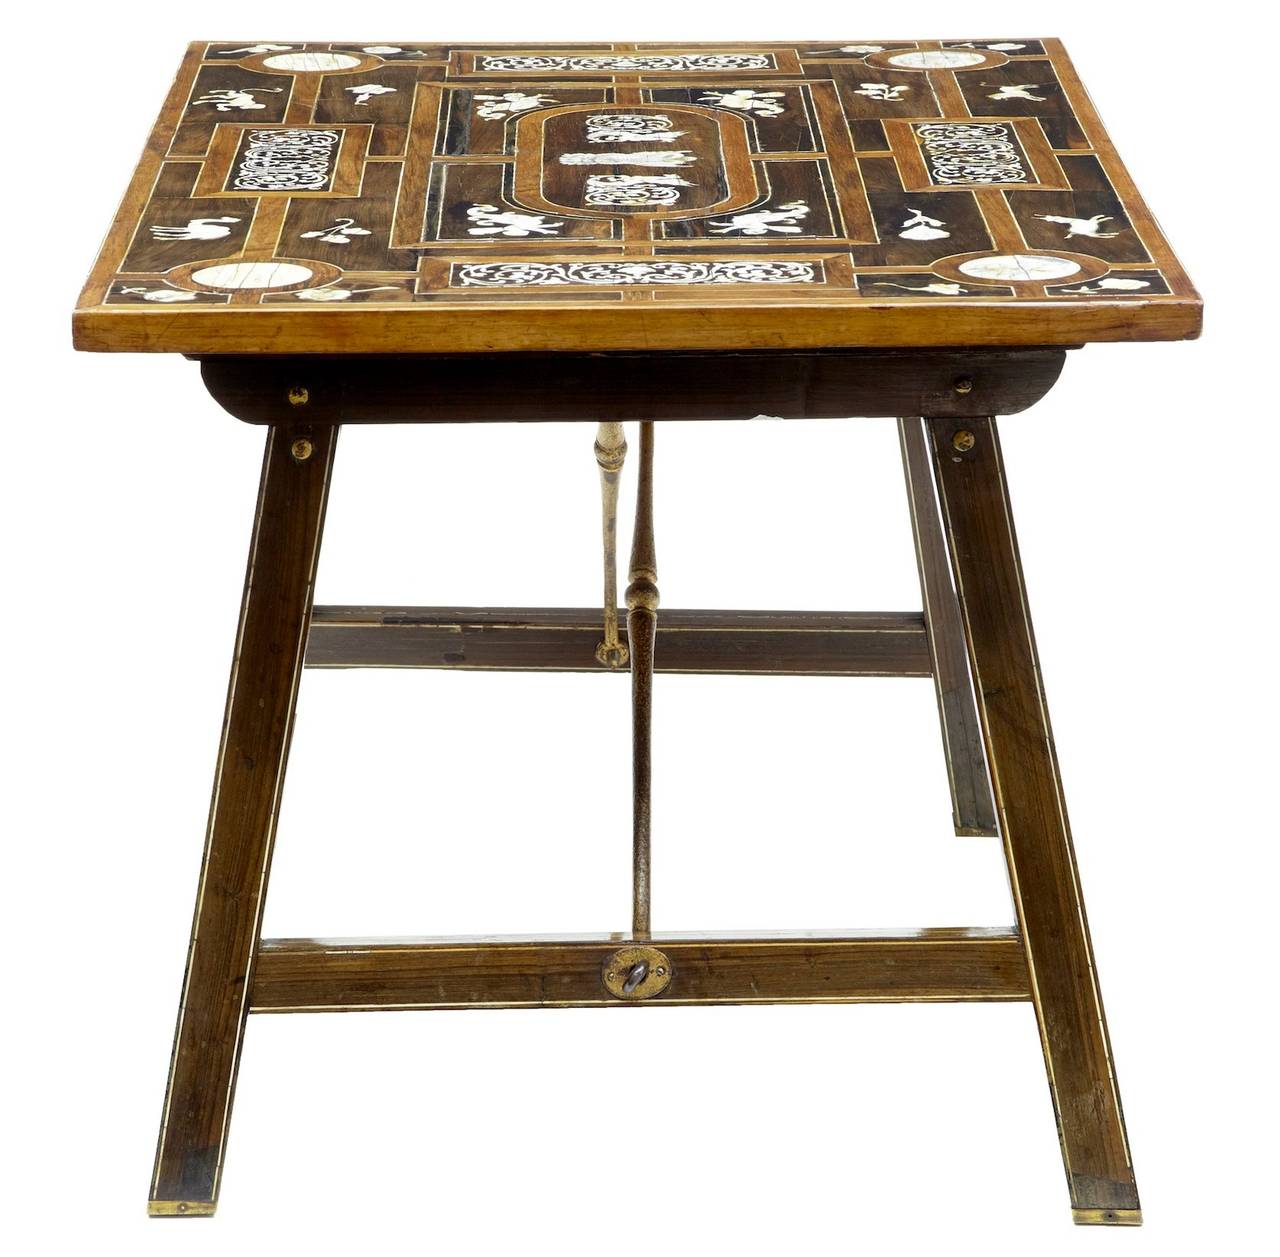 19th century profusely inlaid rosewood side table

Continental bone inlaid table, circa 1880. 

Possibly Spanish. 

Standing on trestle legs which fold flat, supported by iron stretchers.

Measures: Height 19 1/4